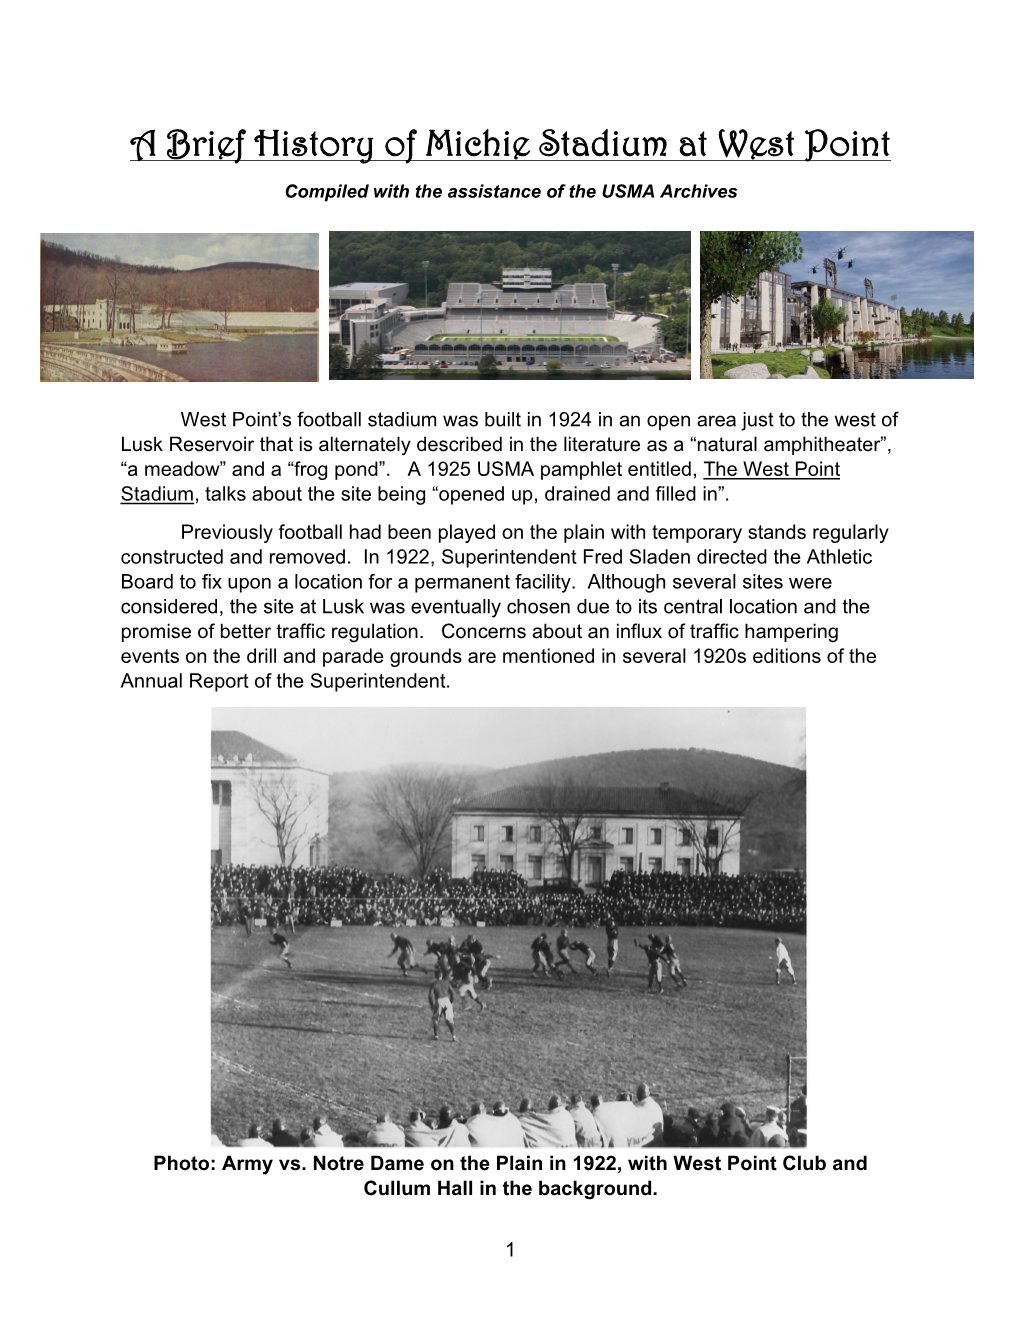 A Brief History of Michie Stadium at West Point